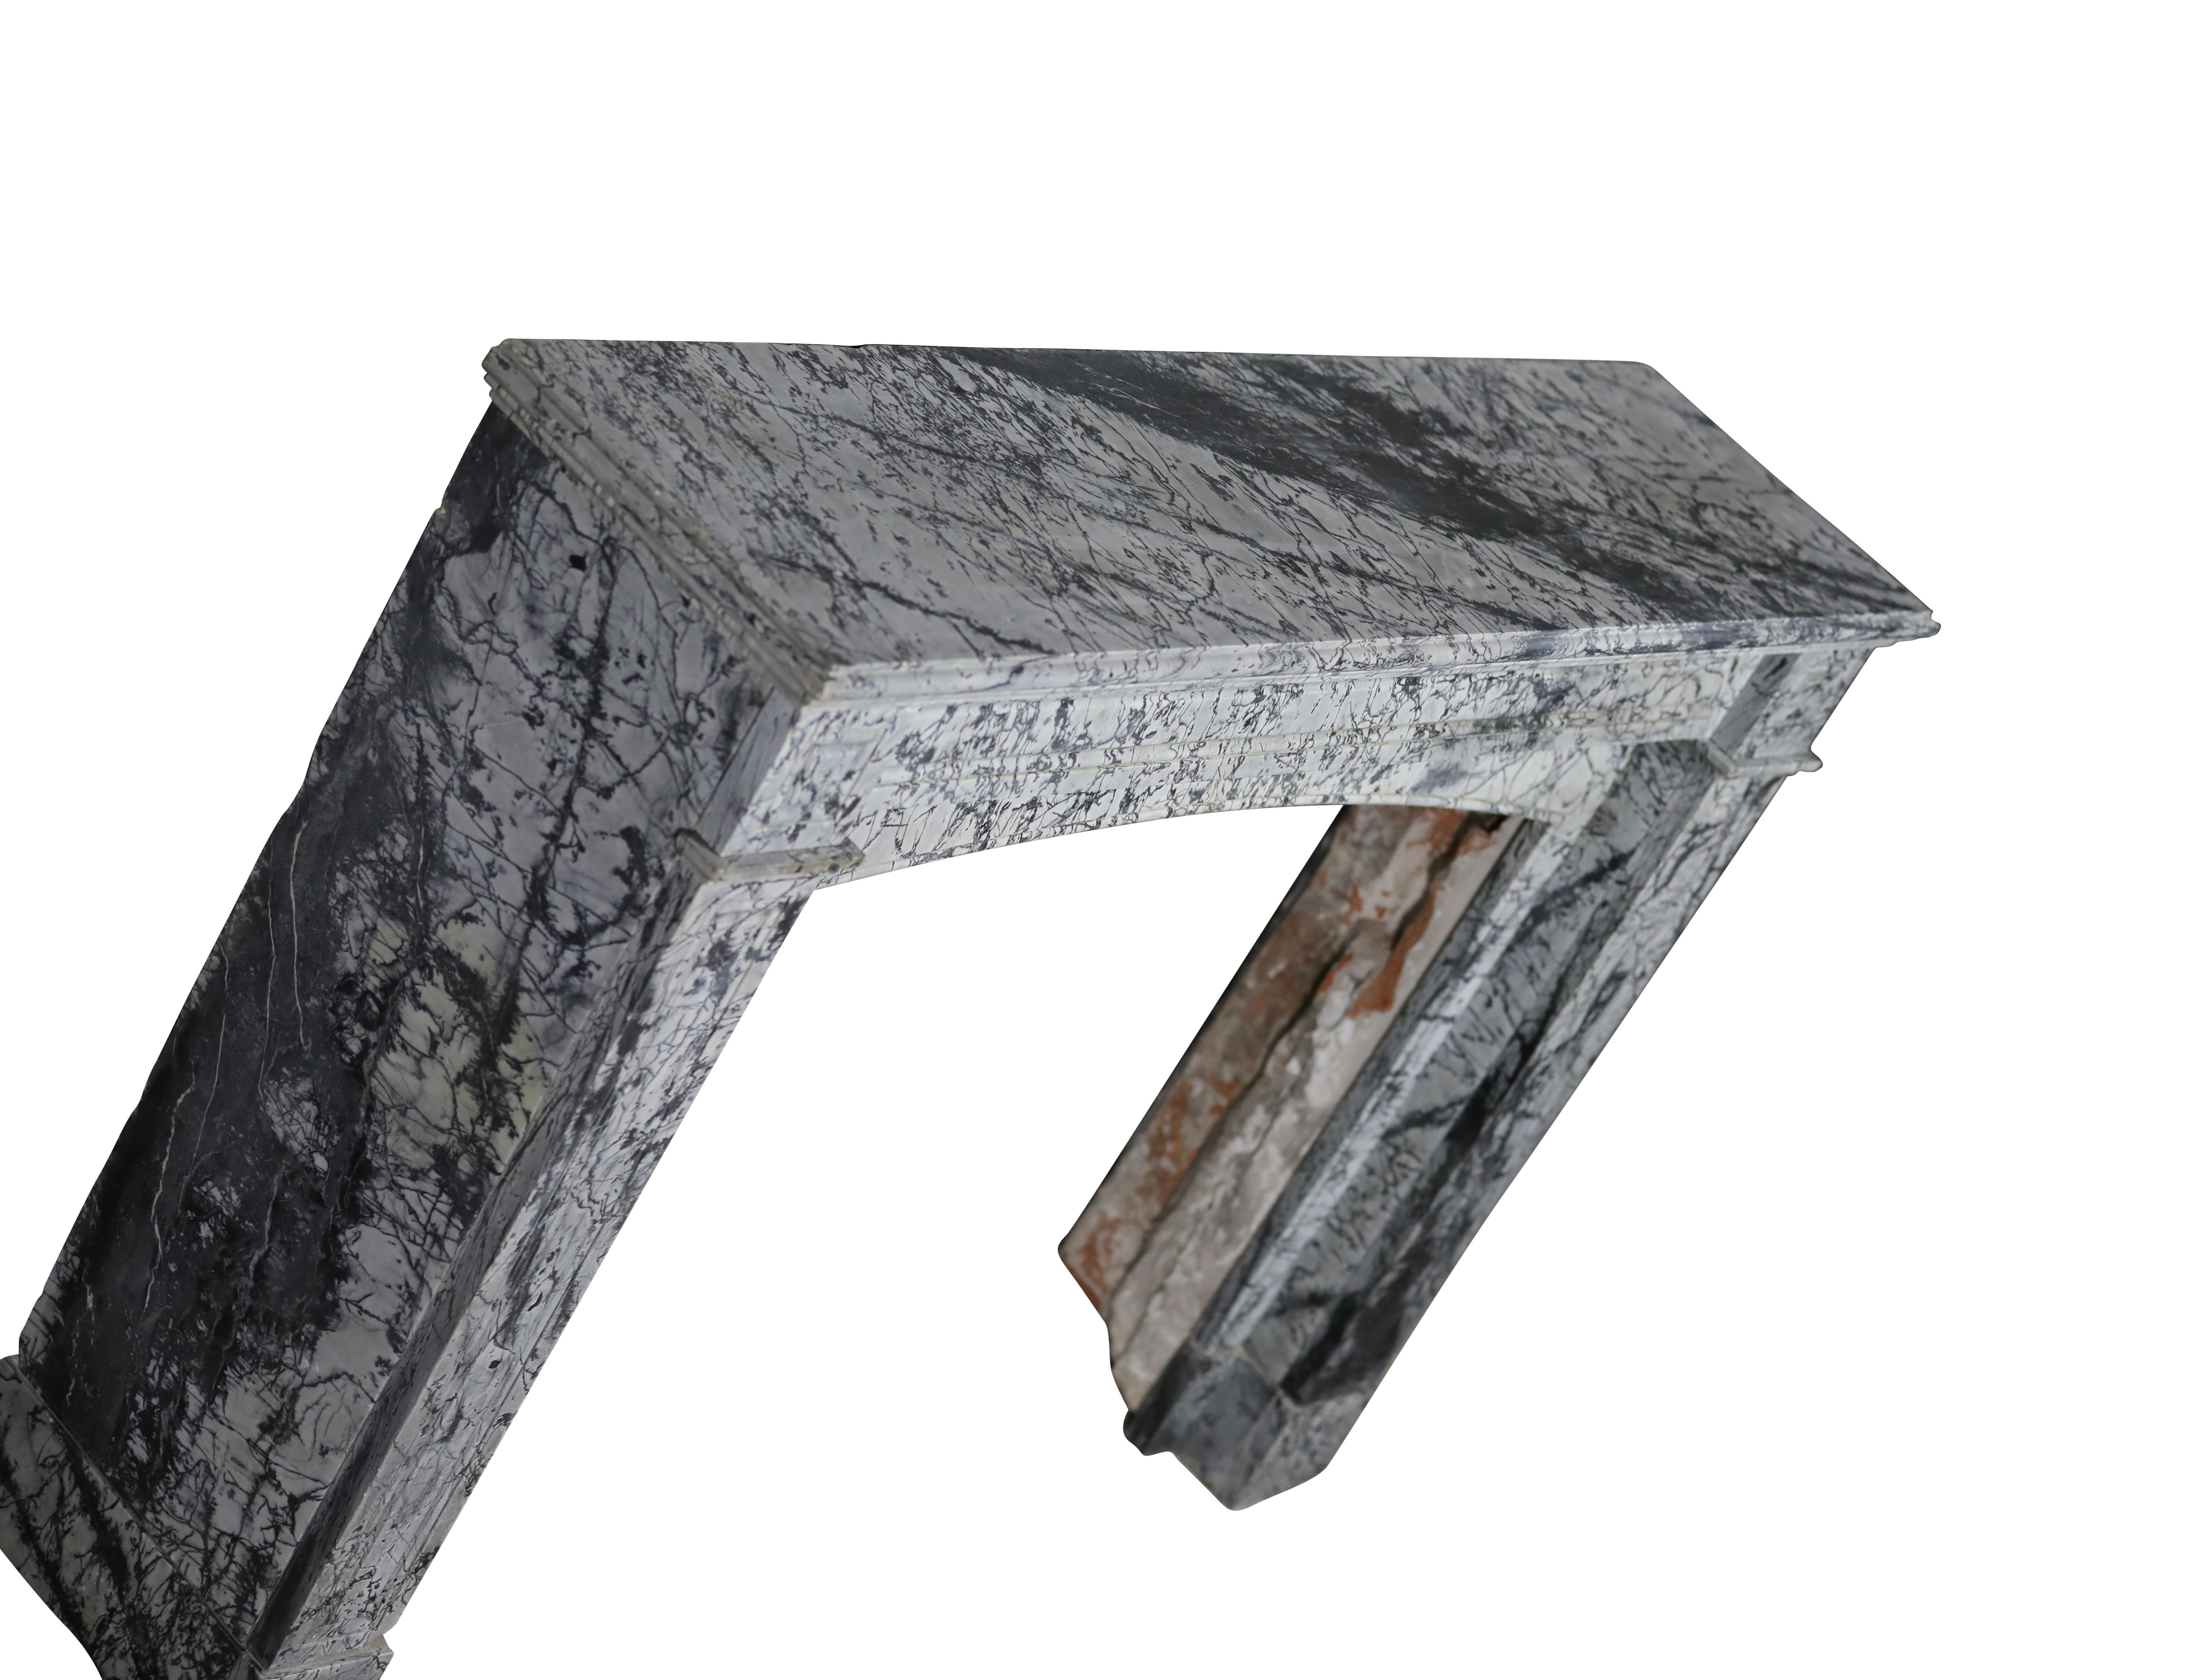 Bleu Turquin Marble Fireplace Surround In Great Condition For Timeless Design For Sale 9